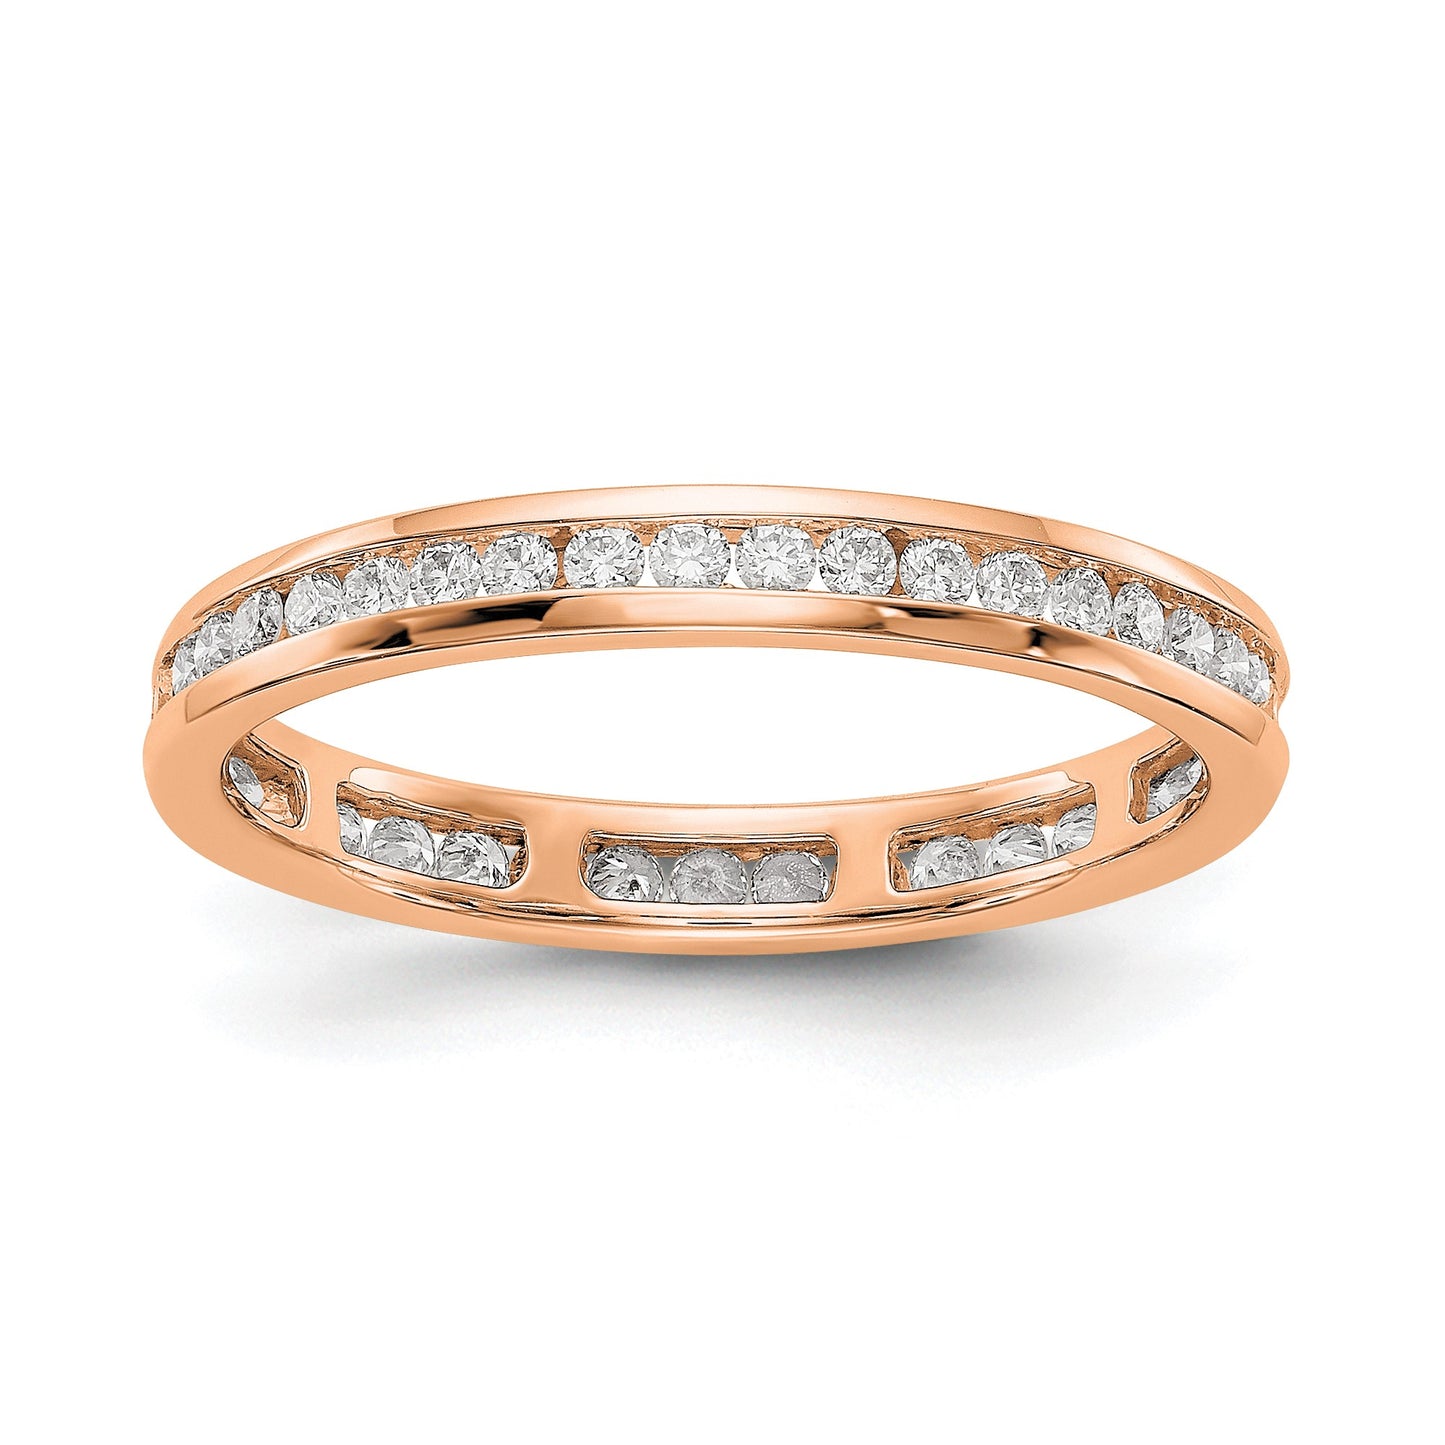 1/2 CT Channel Set Diamond Eternity Wedding Band Ring in 14k Rose Gold